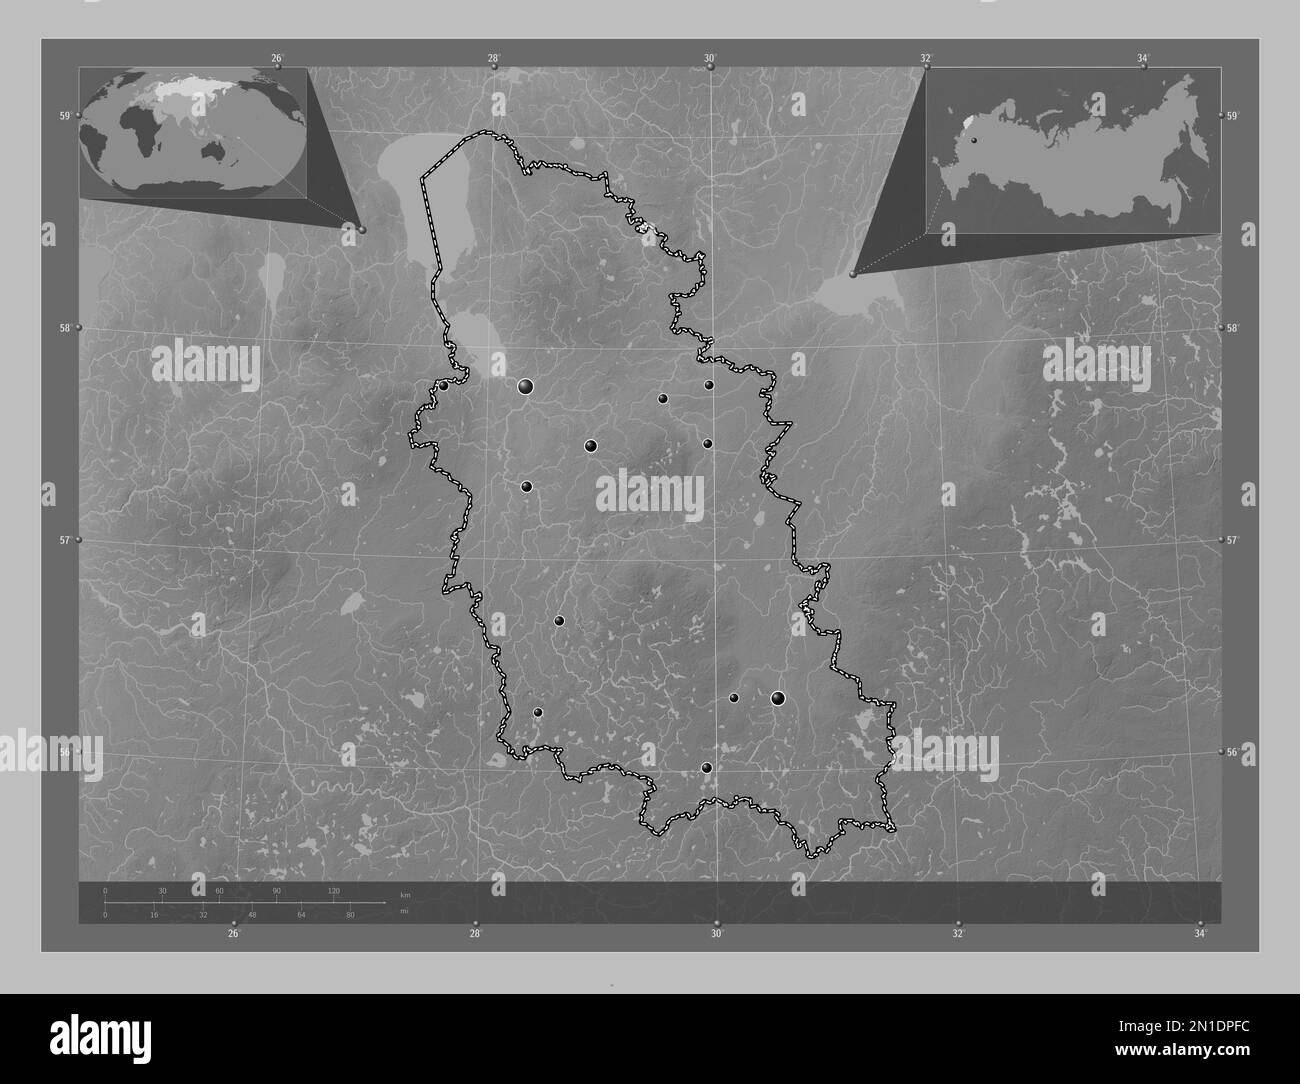 Pskov, region of Russia. Grayscale elevation map with lakes and rivers. Locations of major cities of the region. Corner auxiliary location maps Stock Photo